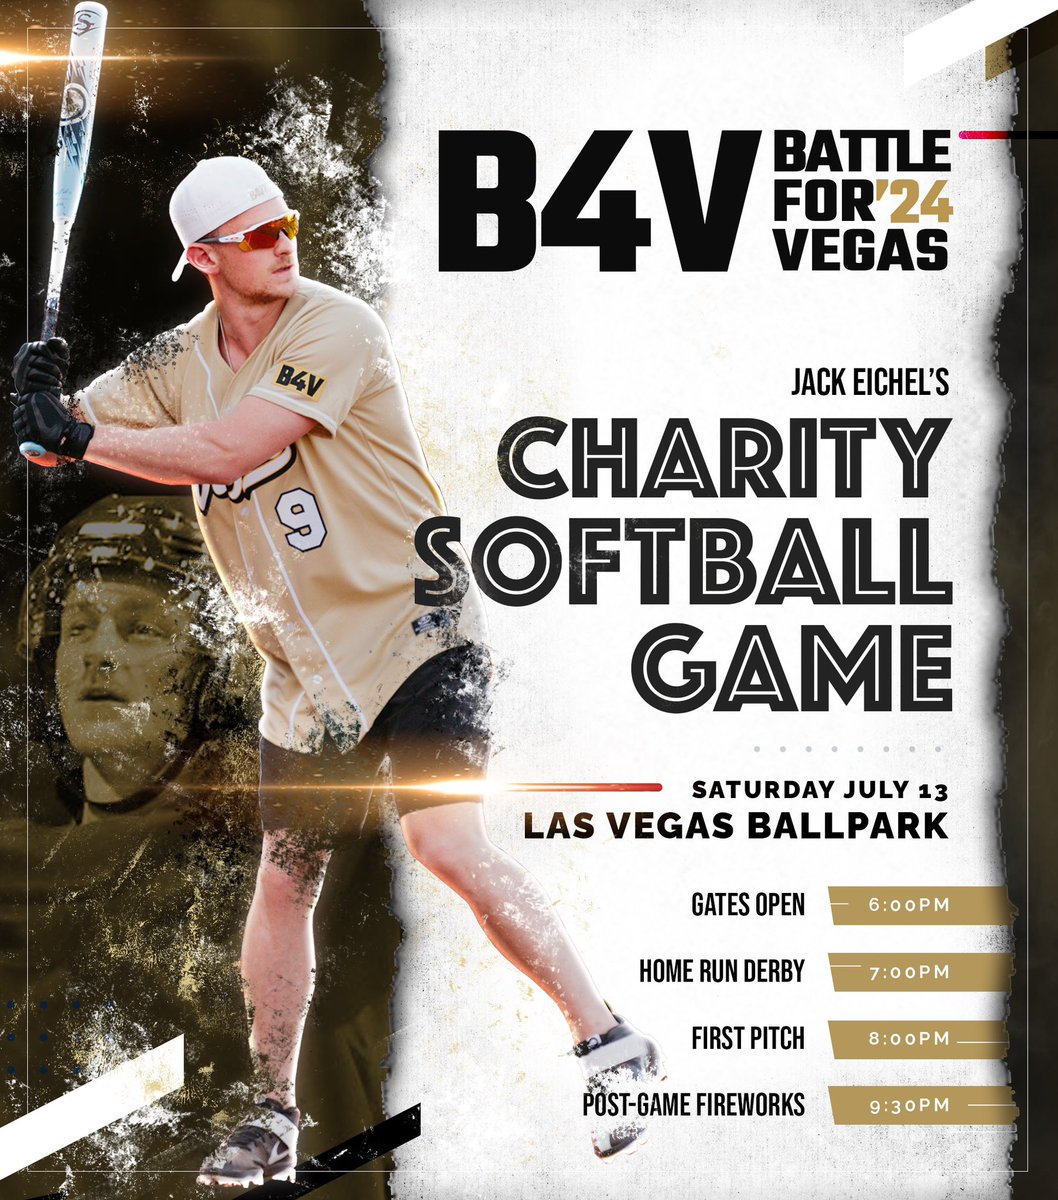 The 5th Annual Battle For Vegas Charity Softball game is back on Saturday, July 13 and hosted this year by @jackeichel! Mark your calendars and tickets will go on sale soon. #B4V24